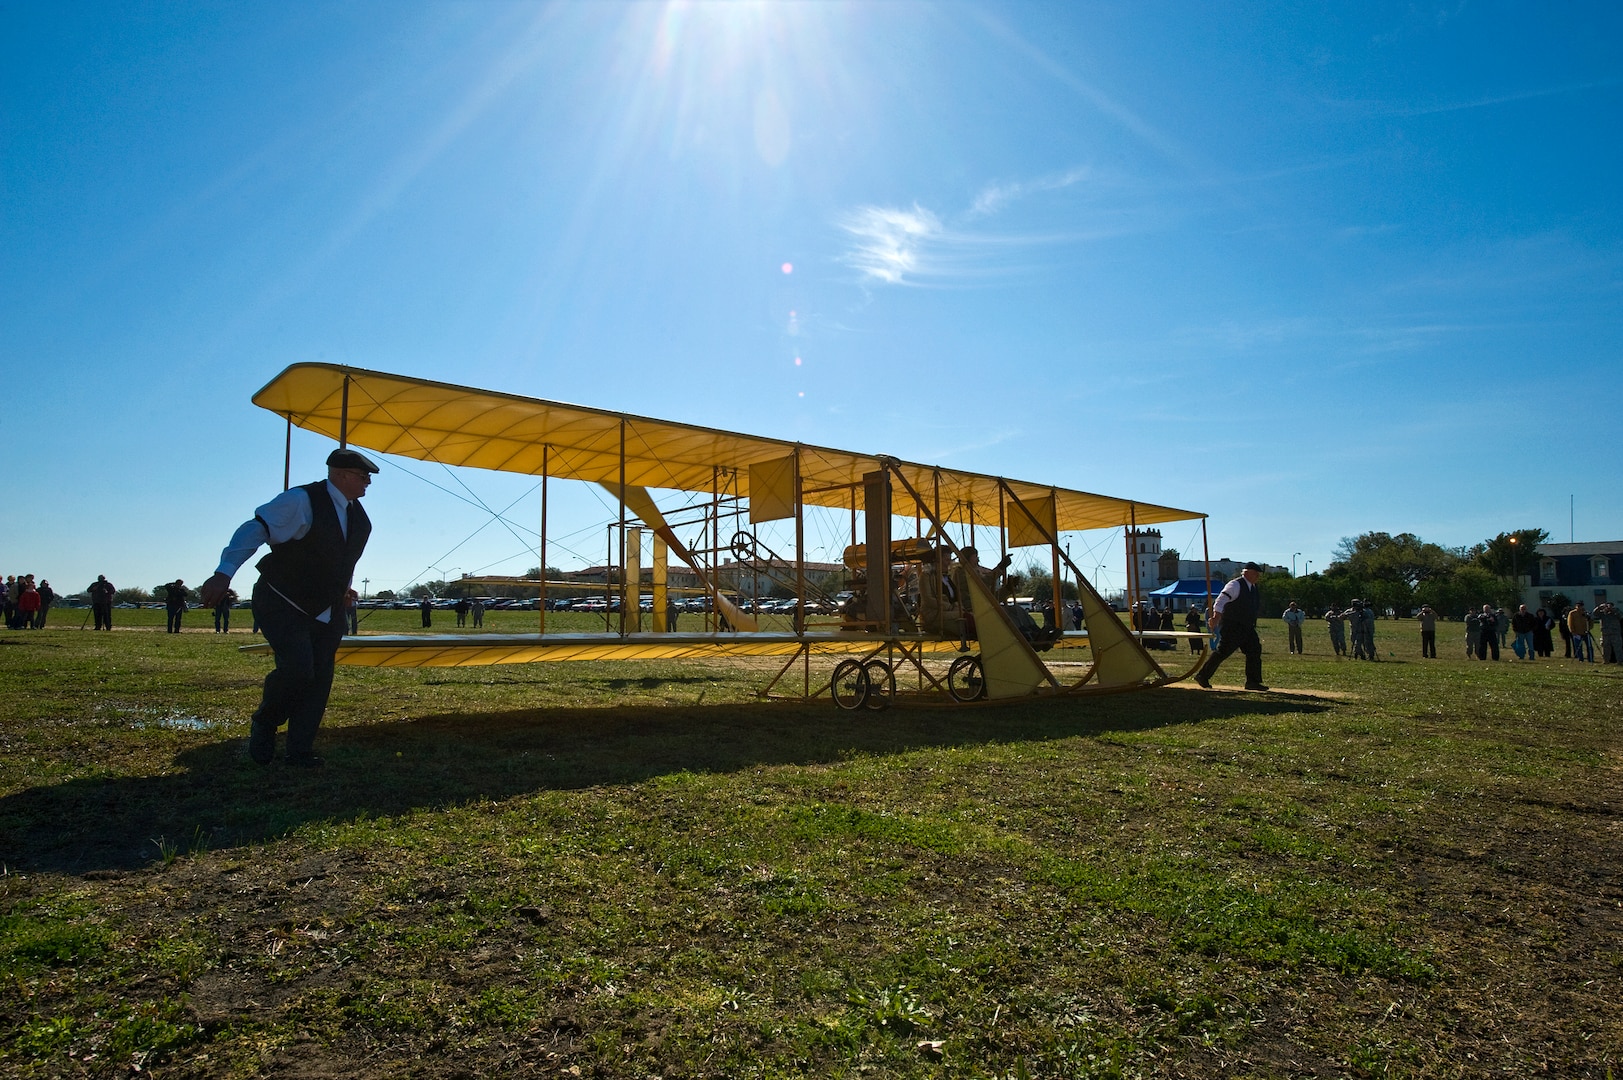 Don Gum, a Wright "B" Flyer pilot, taxis the "Yellow Bird" down the Fort Sam Houston parade ground March 2, 2010, during the Foulois Centennial Military Flight Celebration at Fort Sam Houston, Texas. (U.S. Air Force photo/Staff Sgt. Bennie J. Davis III) 